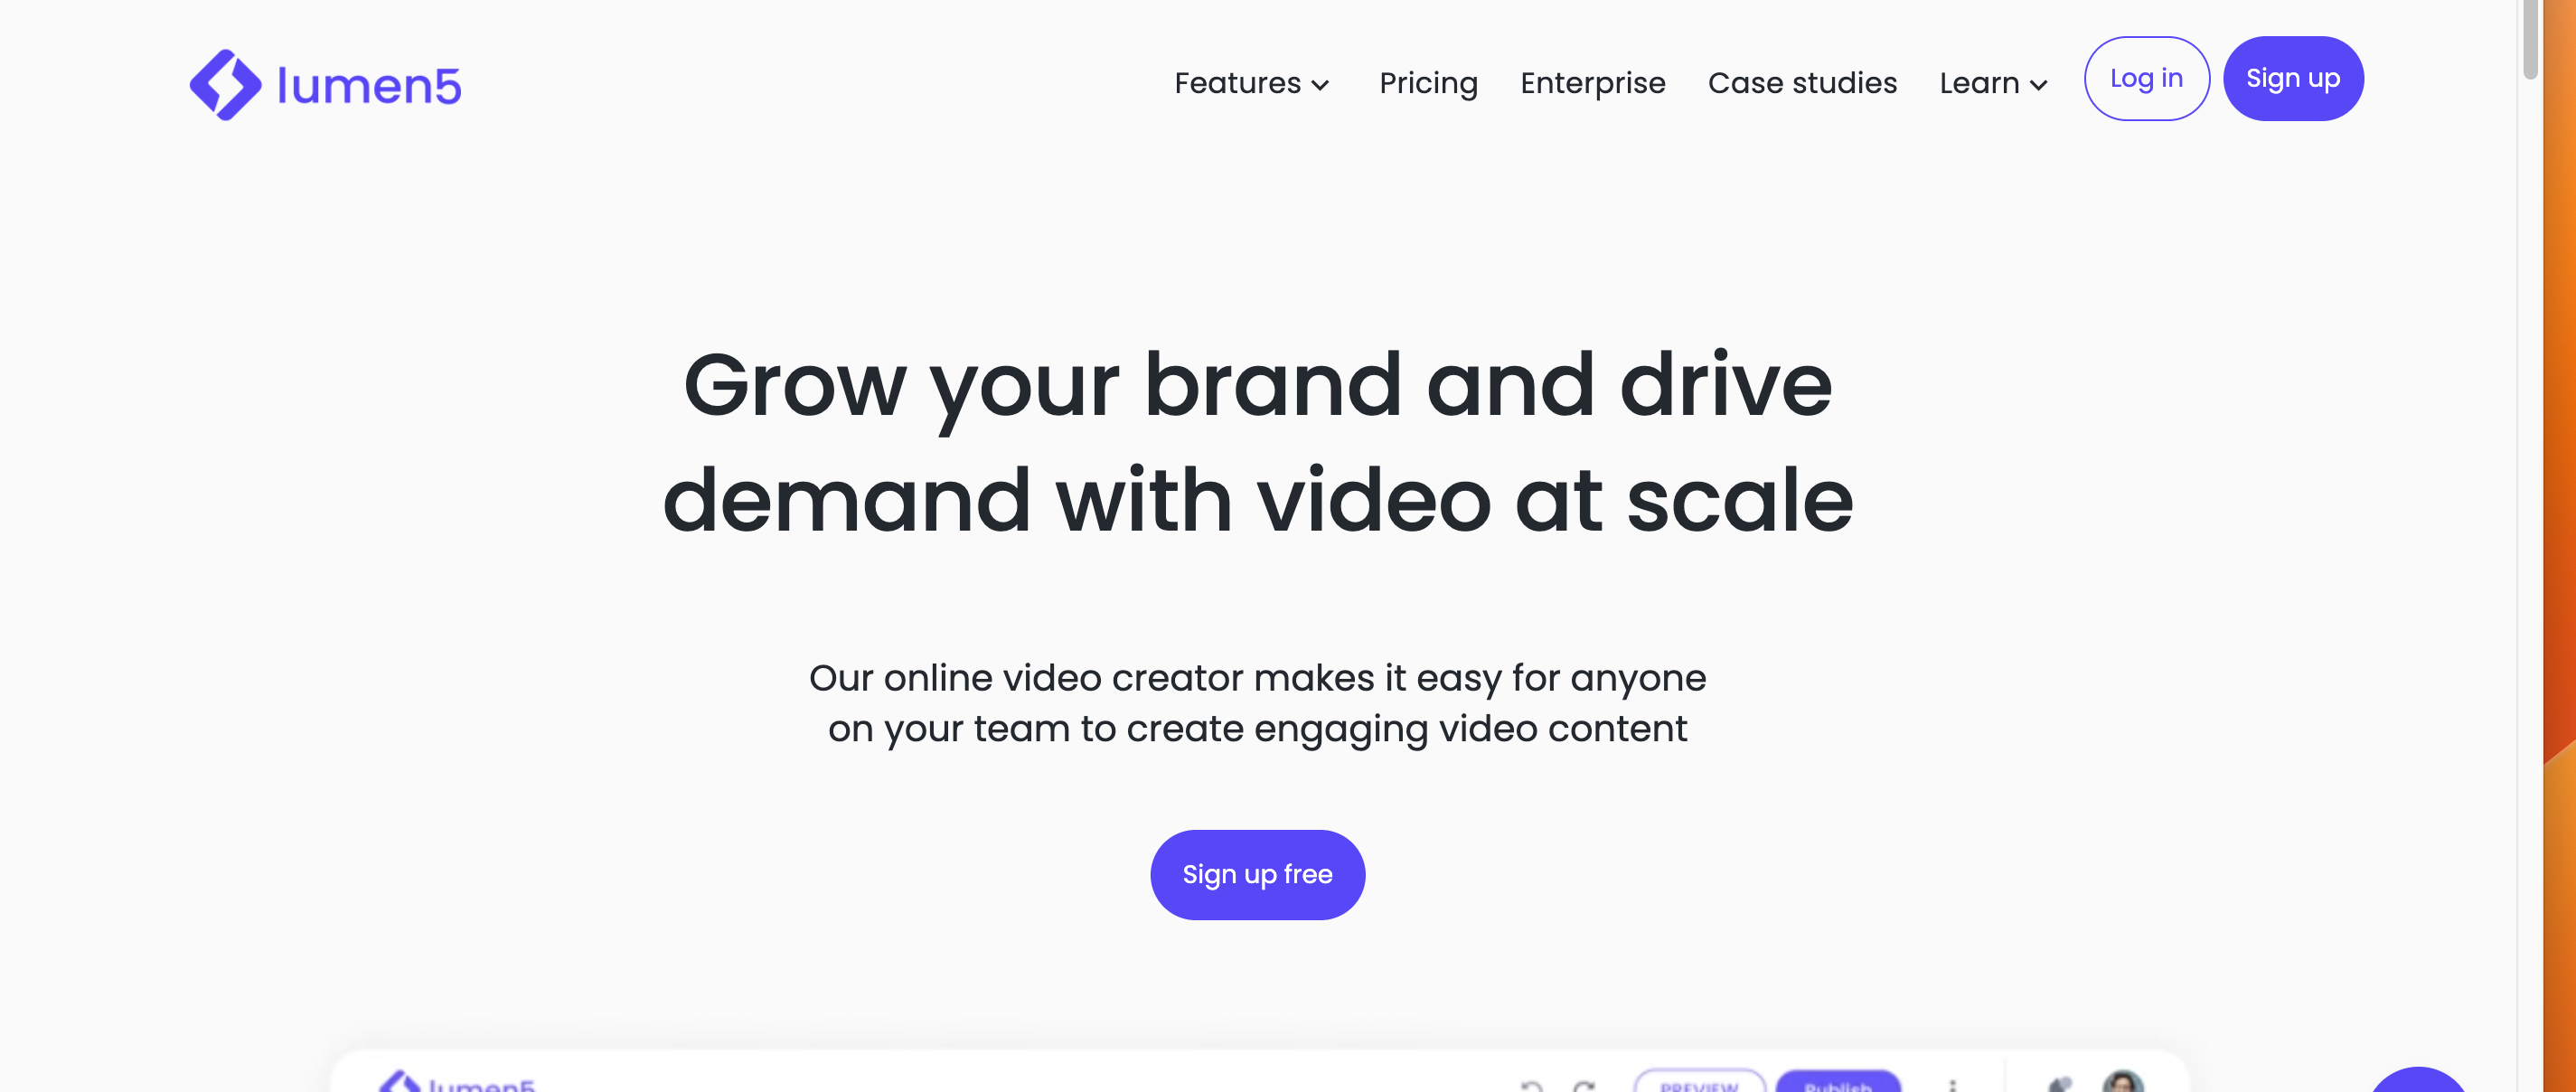 Lumen5 - AI presentation maker - it's really video presentations and the best feature is enter a URL and the tool makes a video